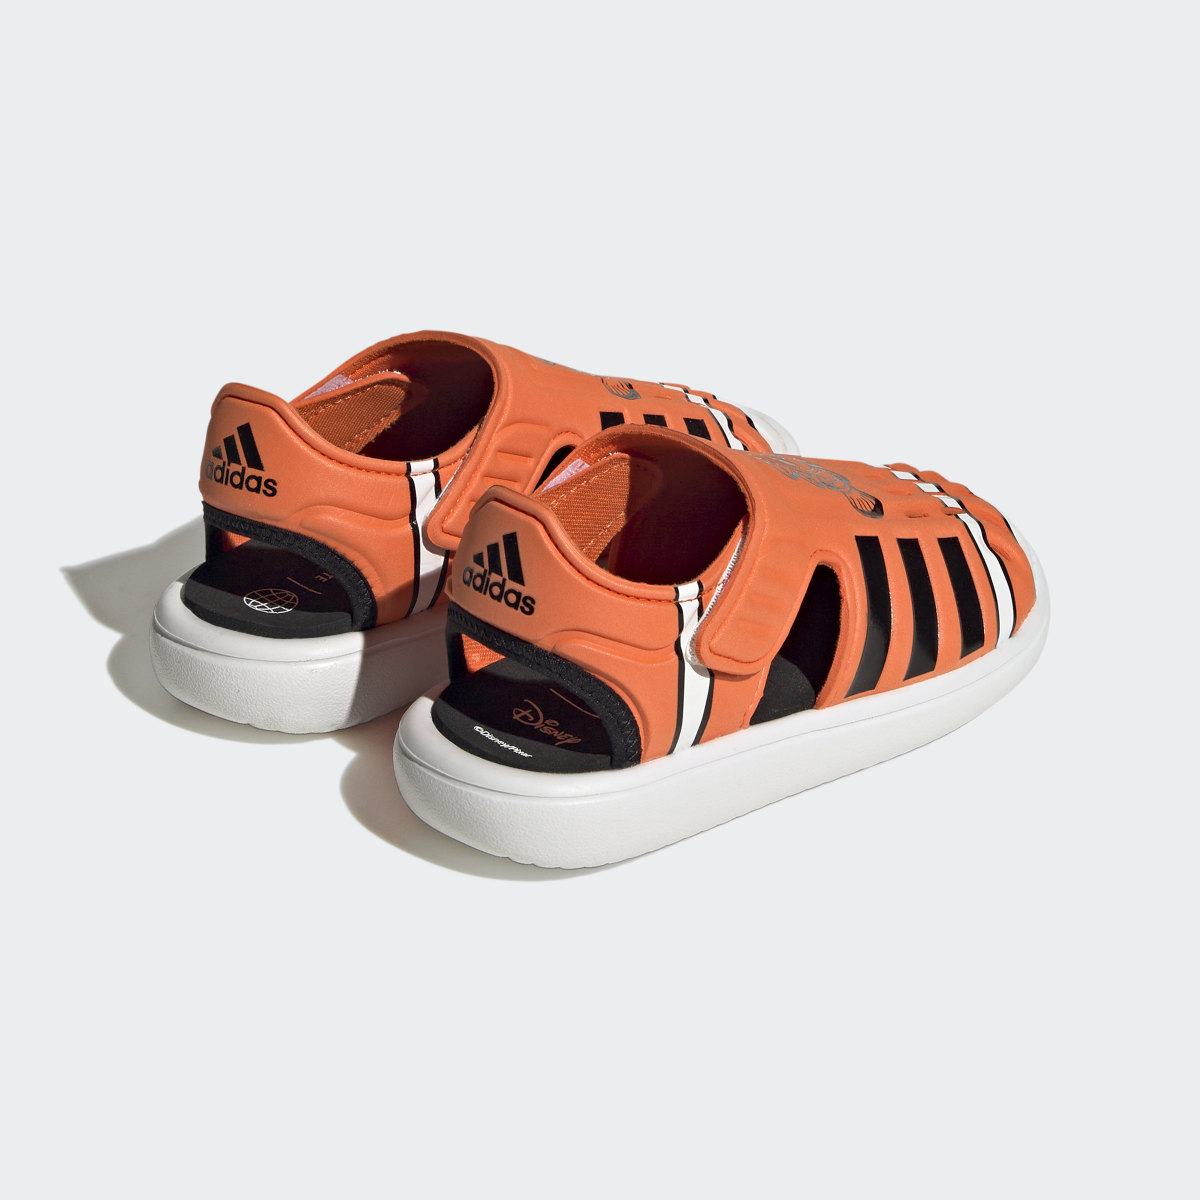 Adidas Finding Nemo and Dory Closed Toe Summer Sandalet. 6